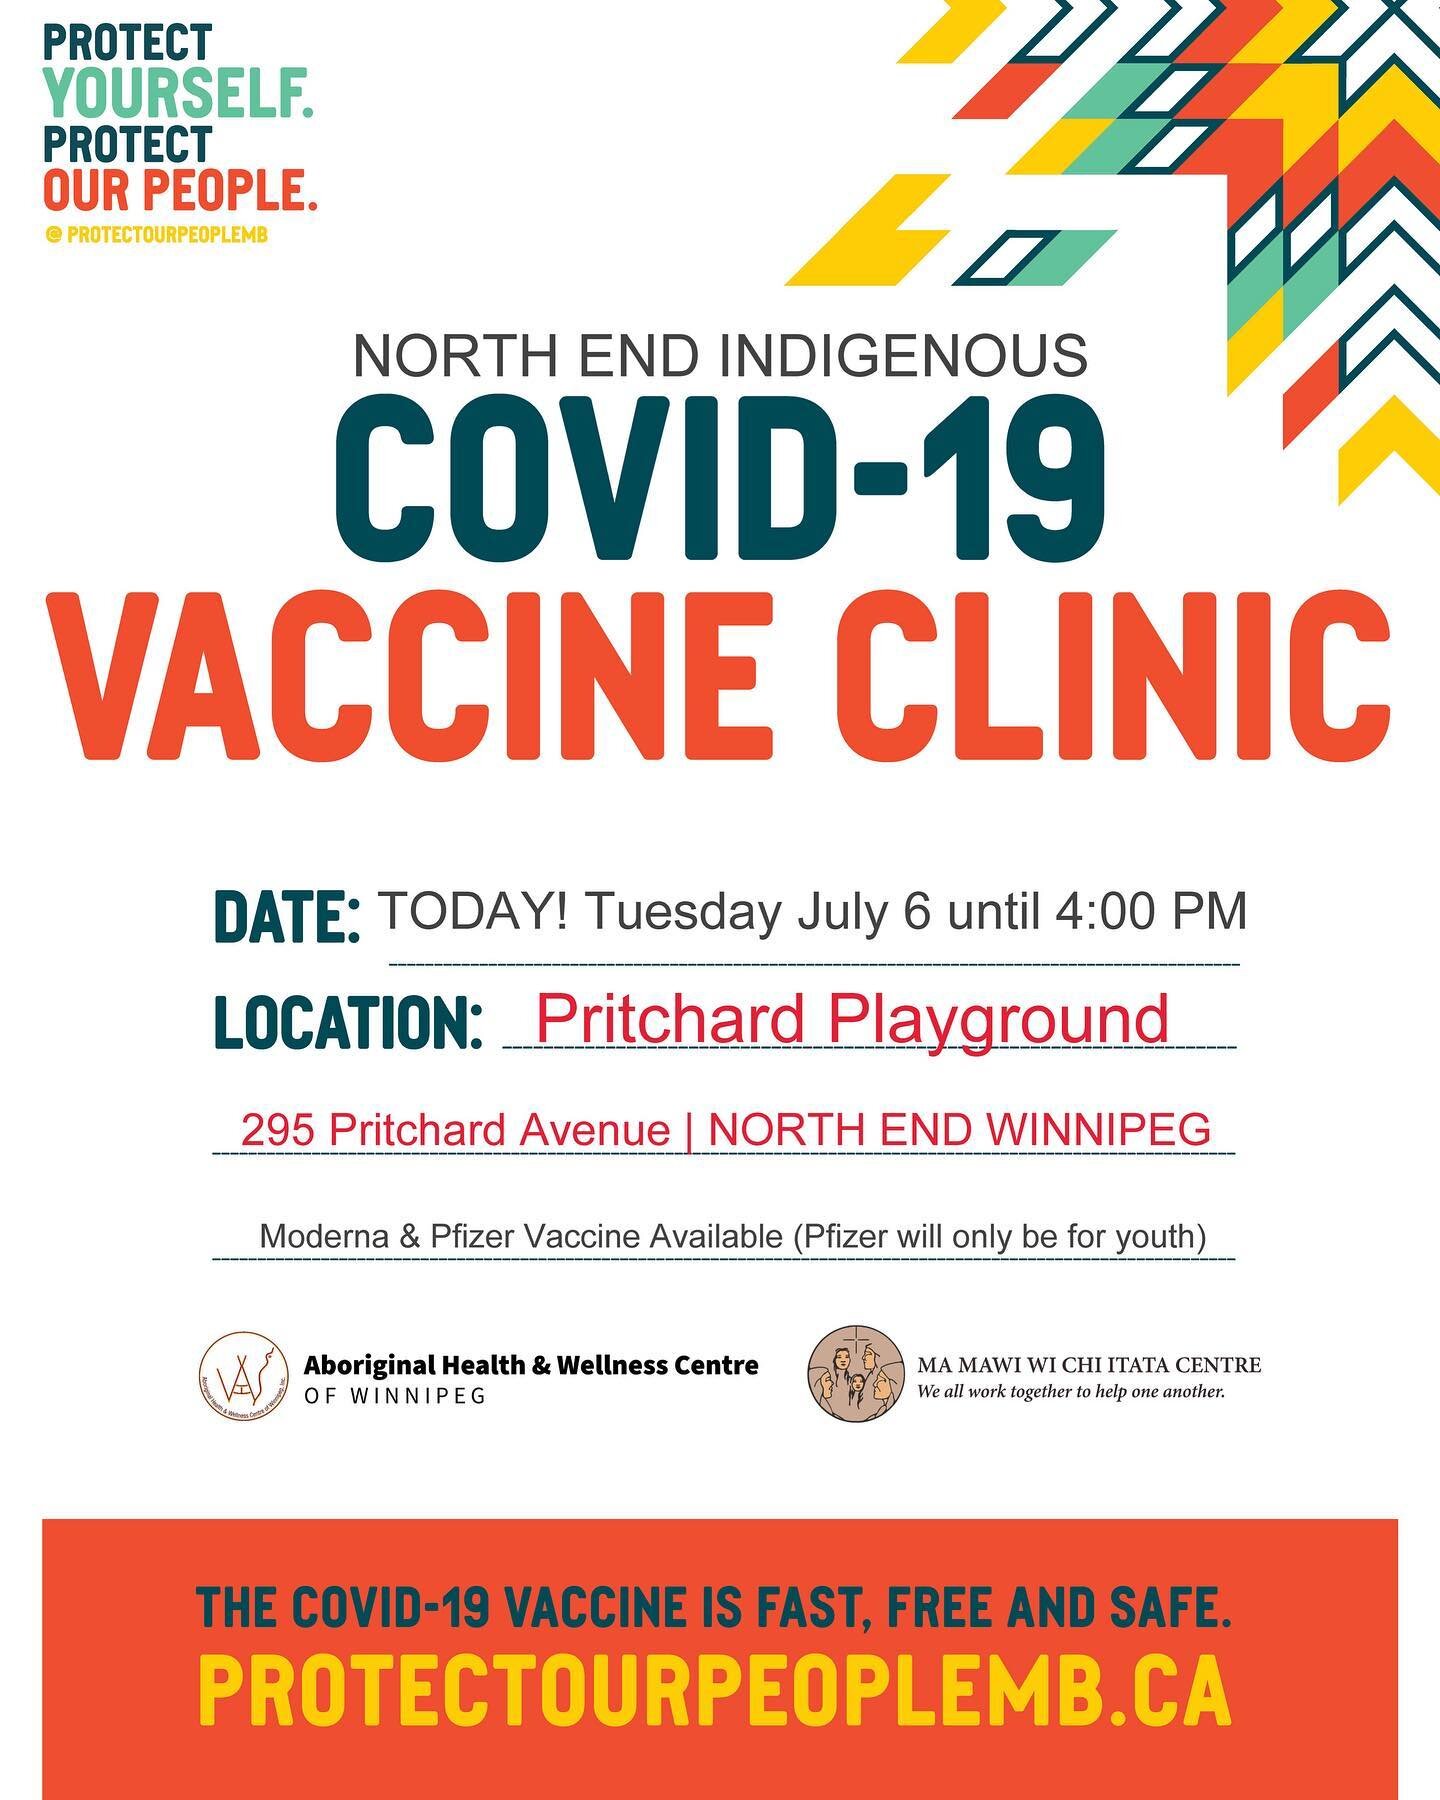 NORTH END FRIENDS!

Tuesday July 6, TODAY until 4 PM!

William Whyte/North End residents are welcome to come to the mobile vaccination clinic at Pritchard Playground until 4 PM. 

Aboriginal Health and Wellness and @ma_mawi staff are on site to suppo